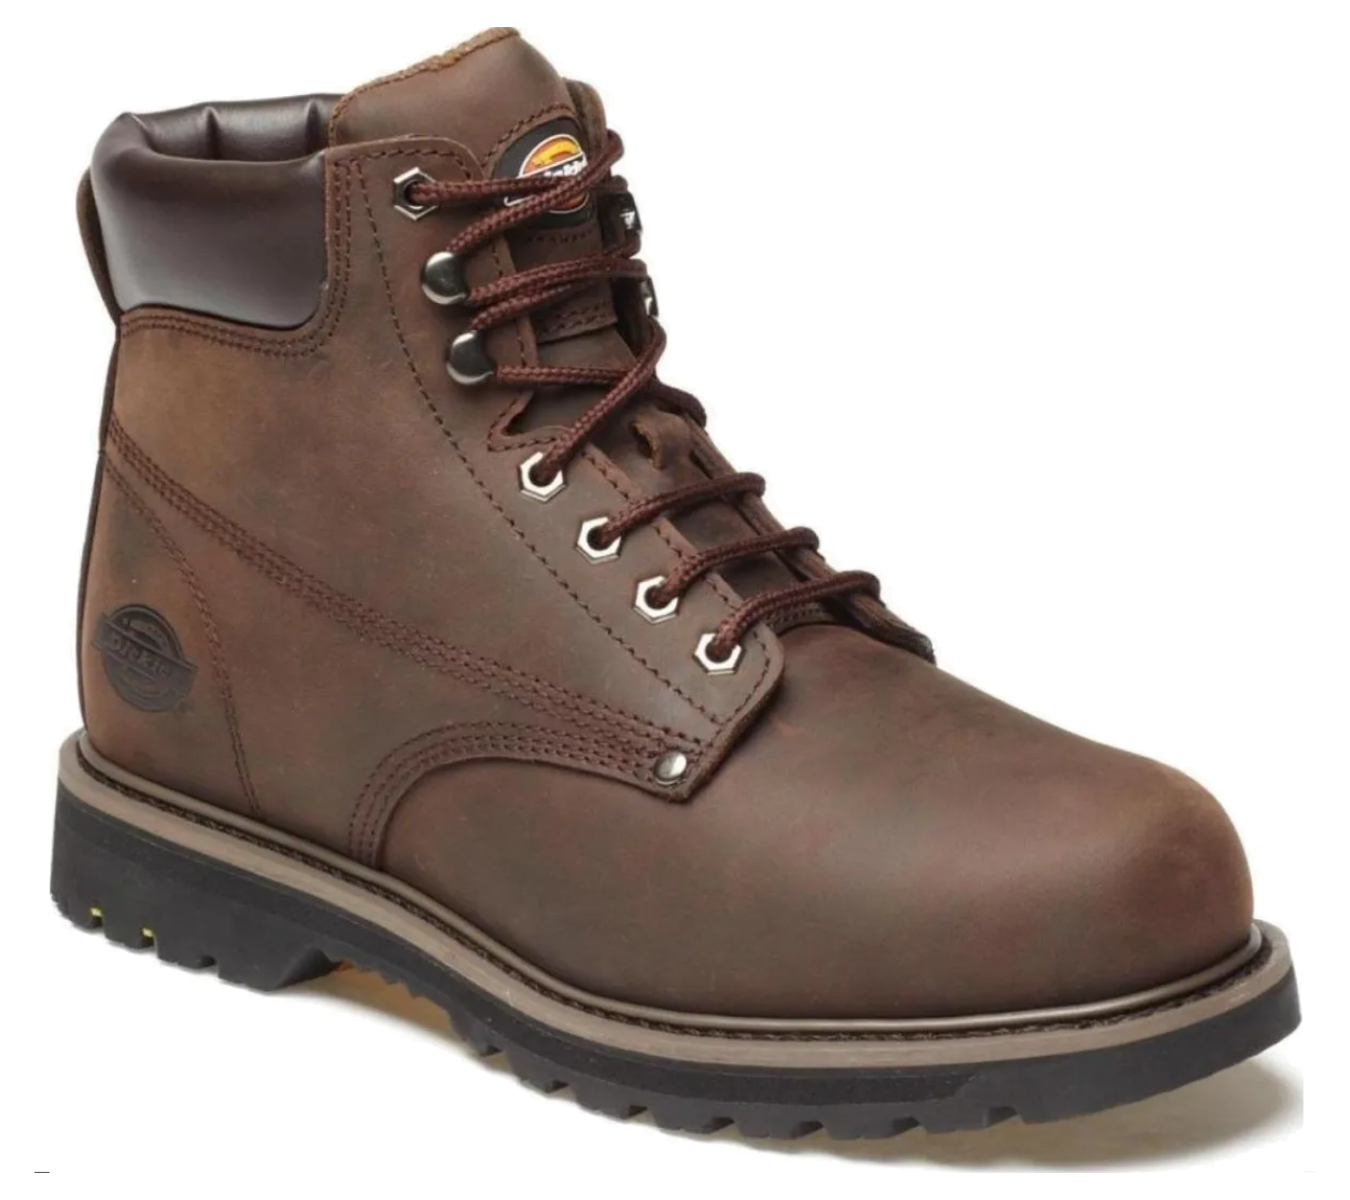 Dickies Welton Boot - Non-Safety